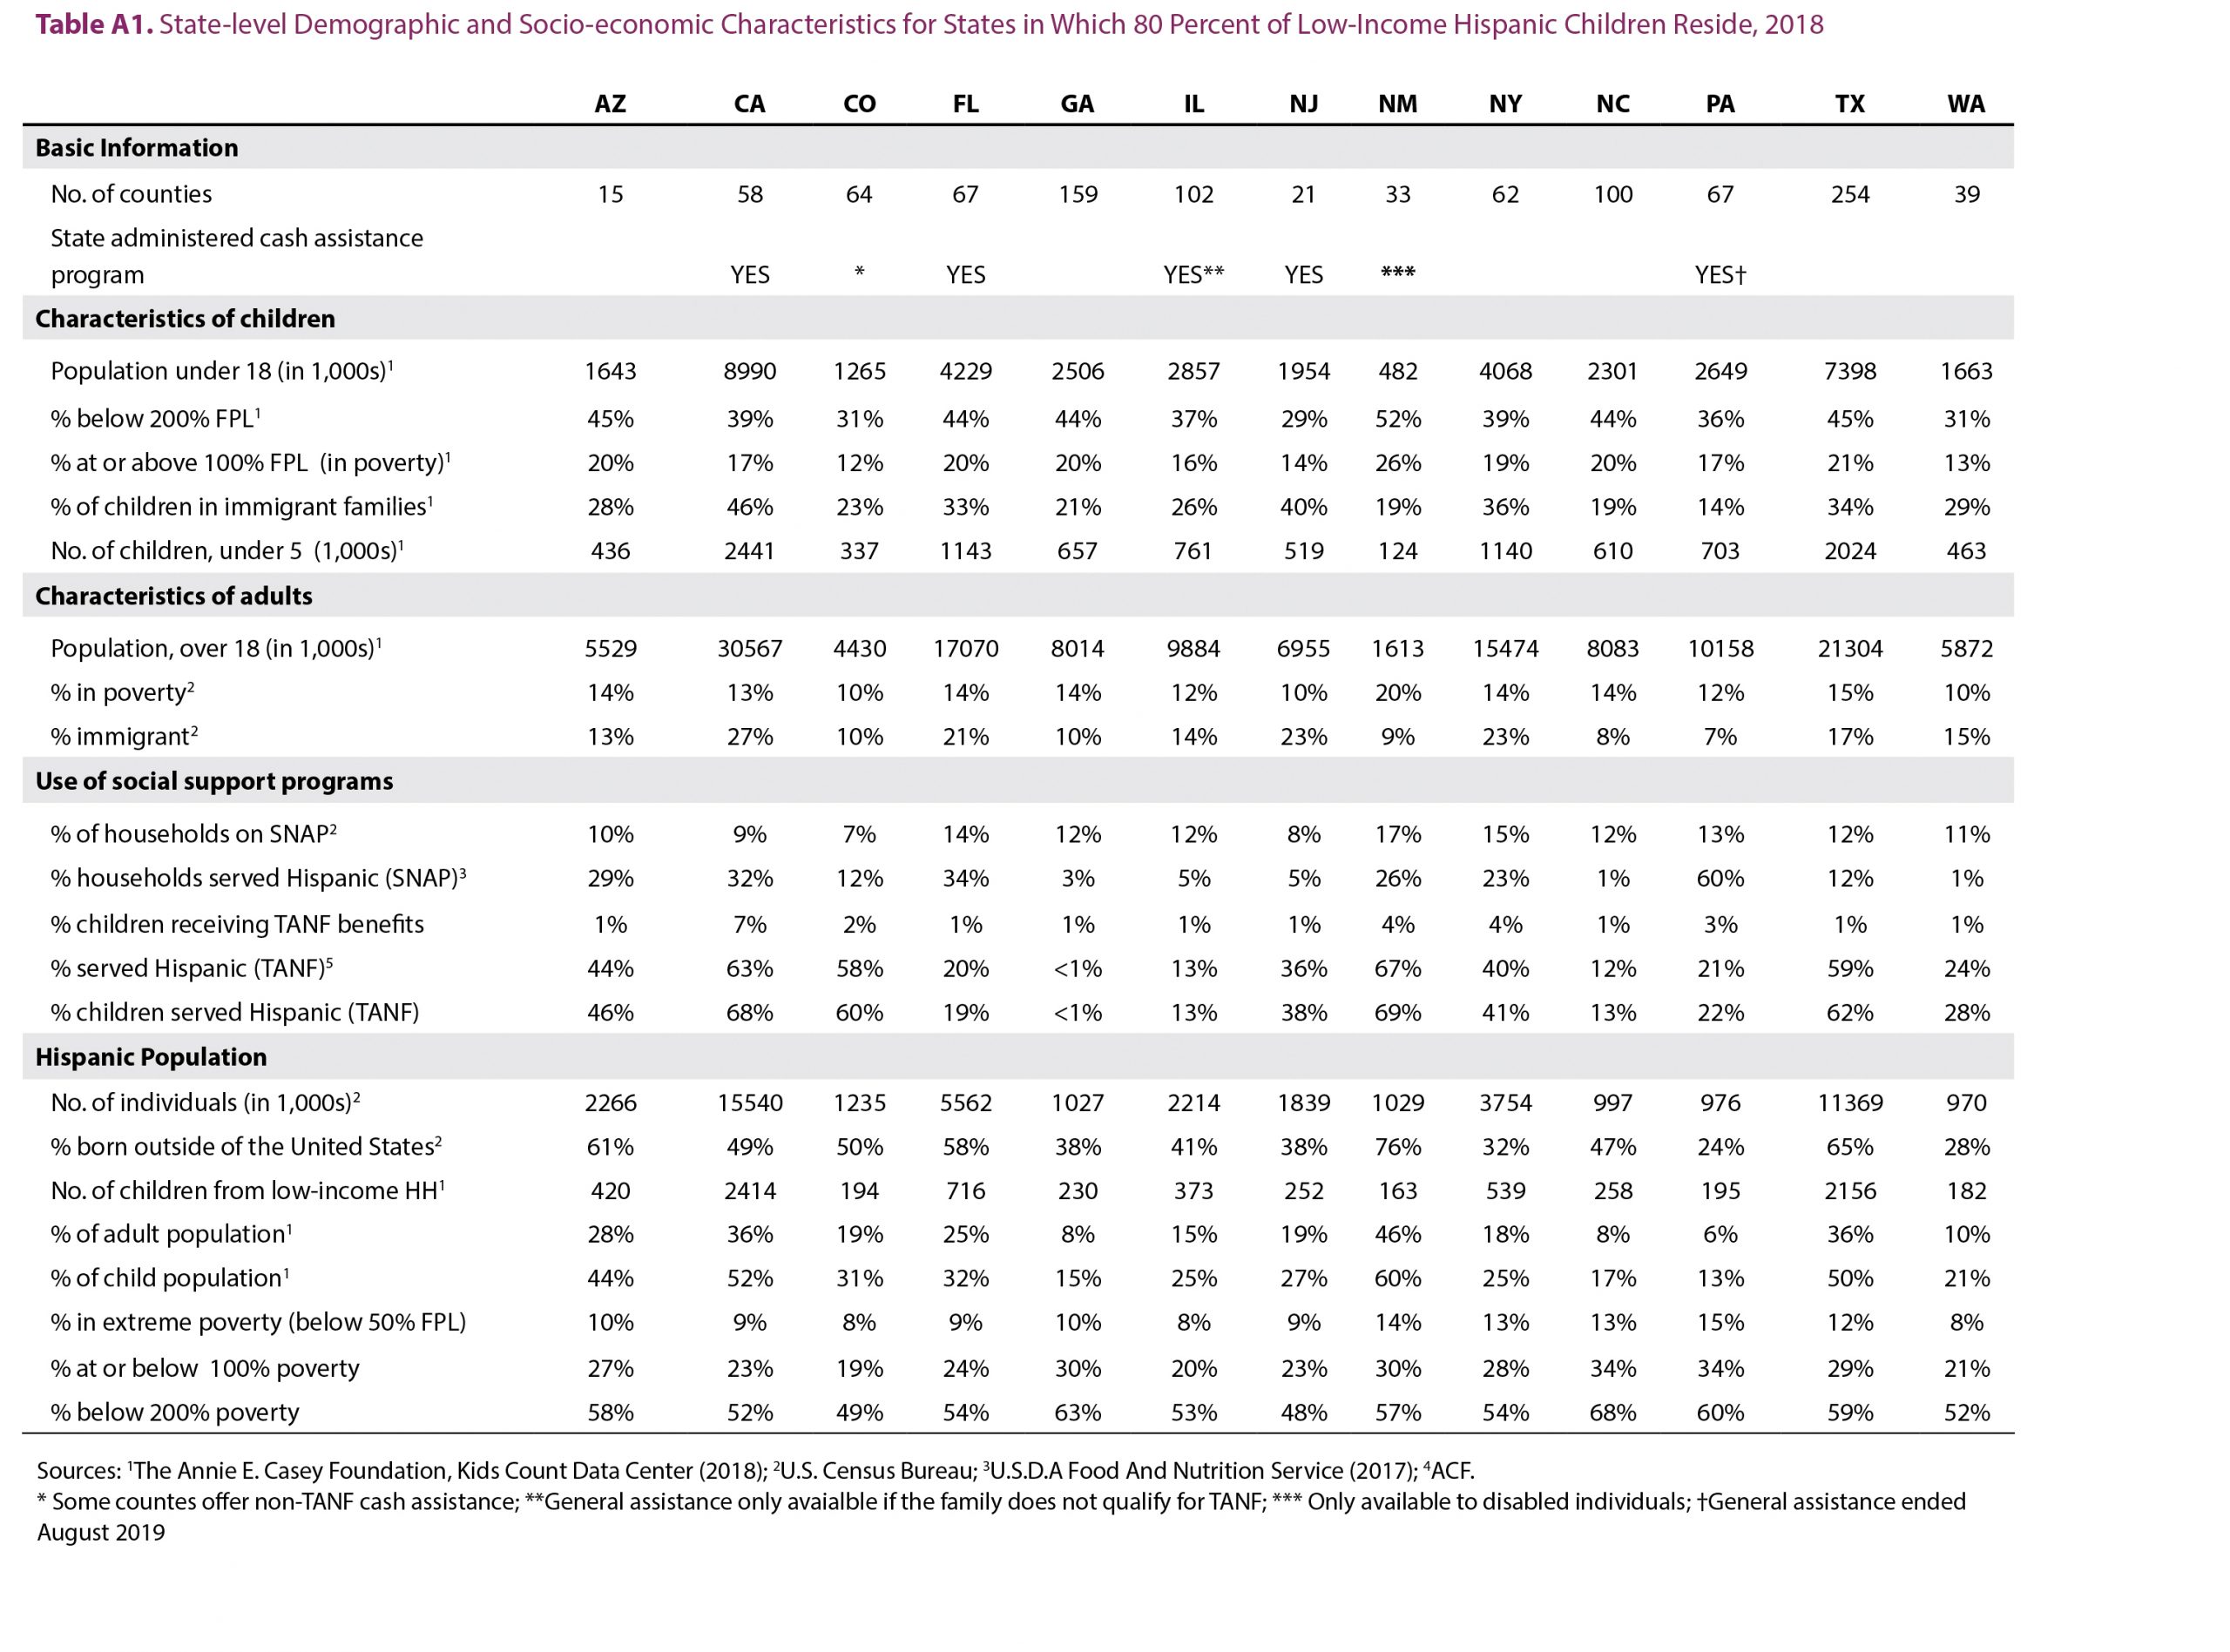 Table A1. State-level Demographic and Socio-economic Characteristics for States in Which 80 Percent of Low-Income Hispanic Children Reside, 2018